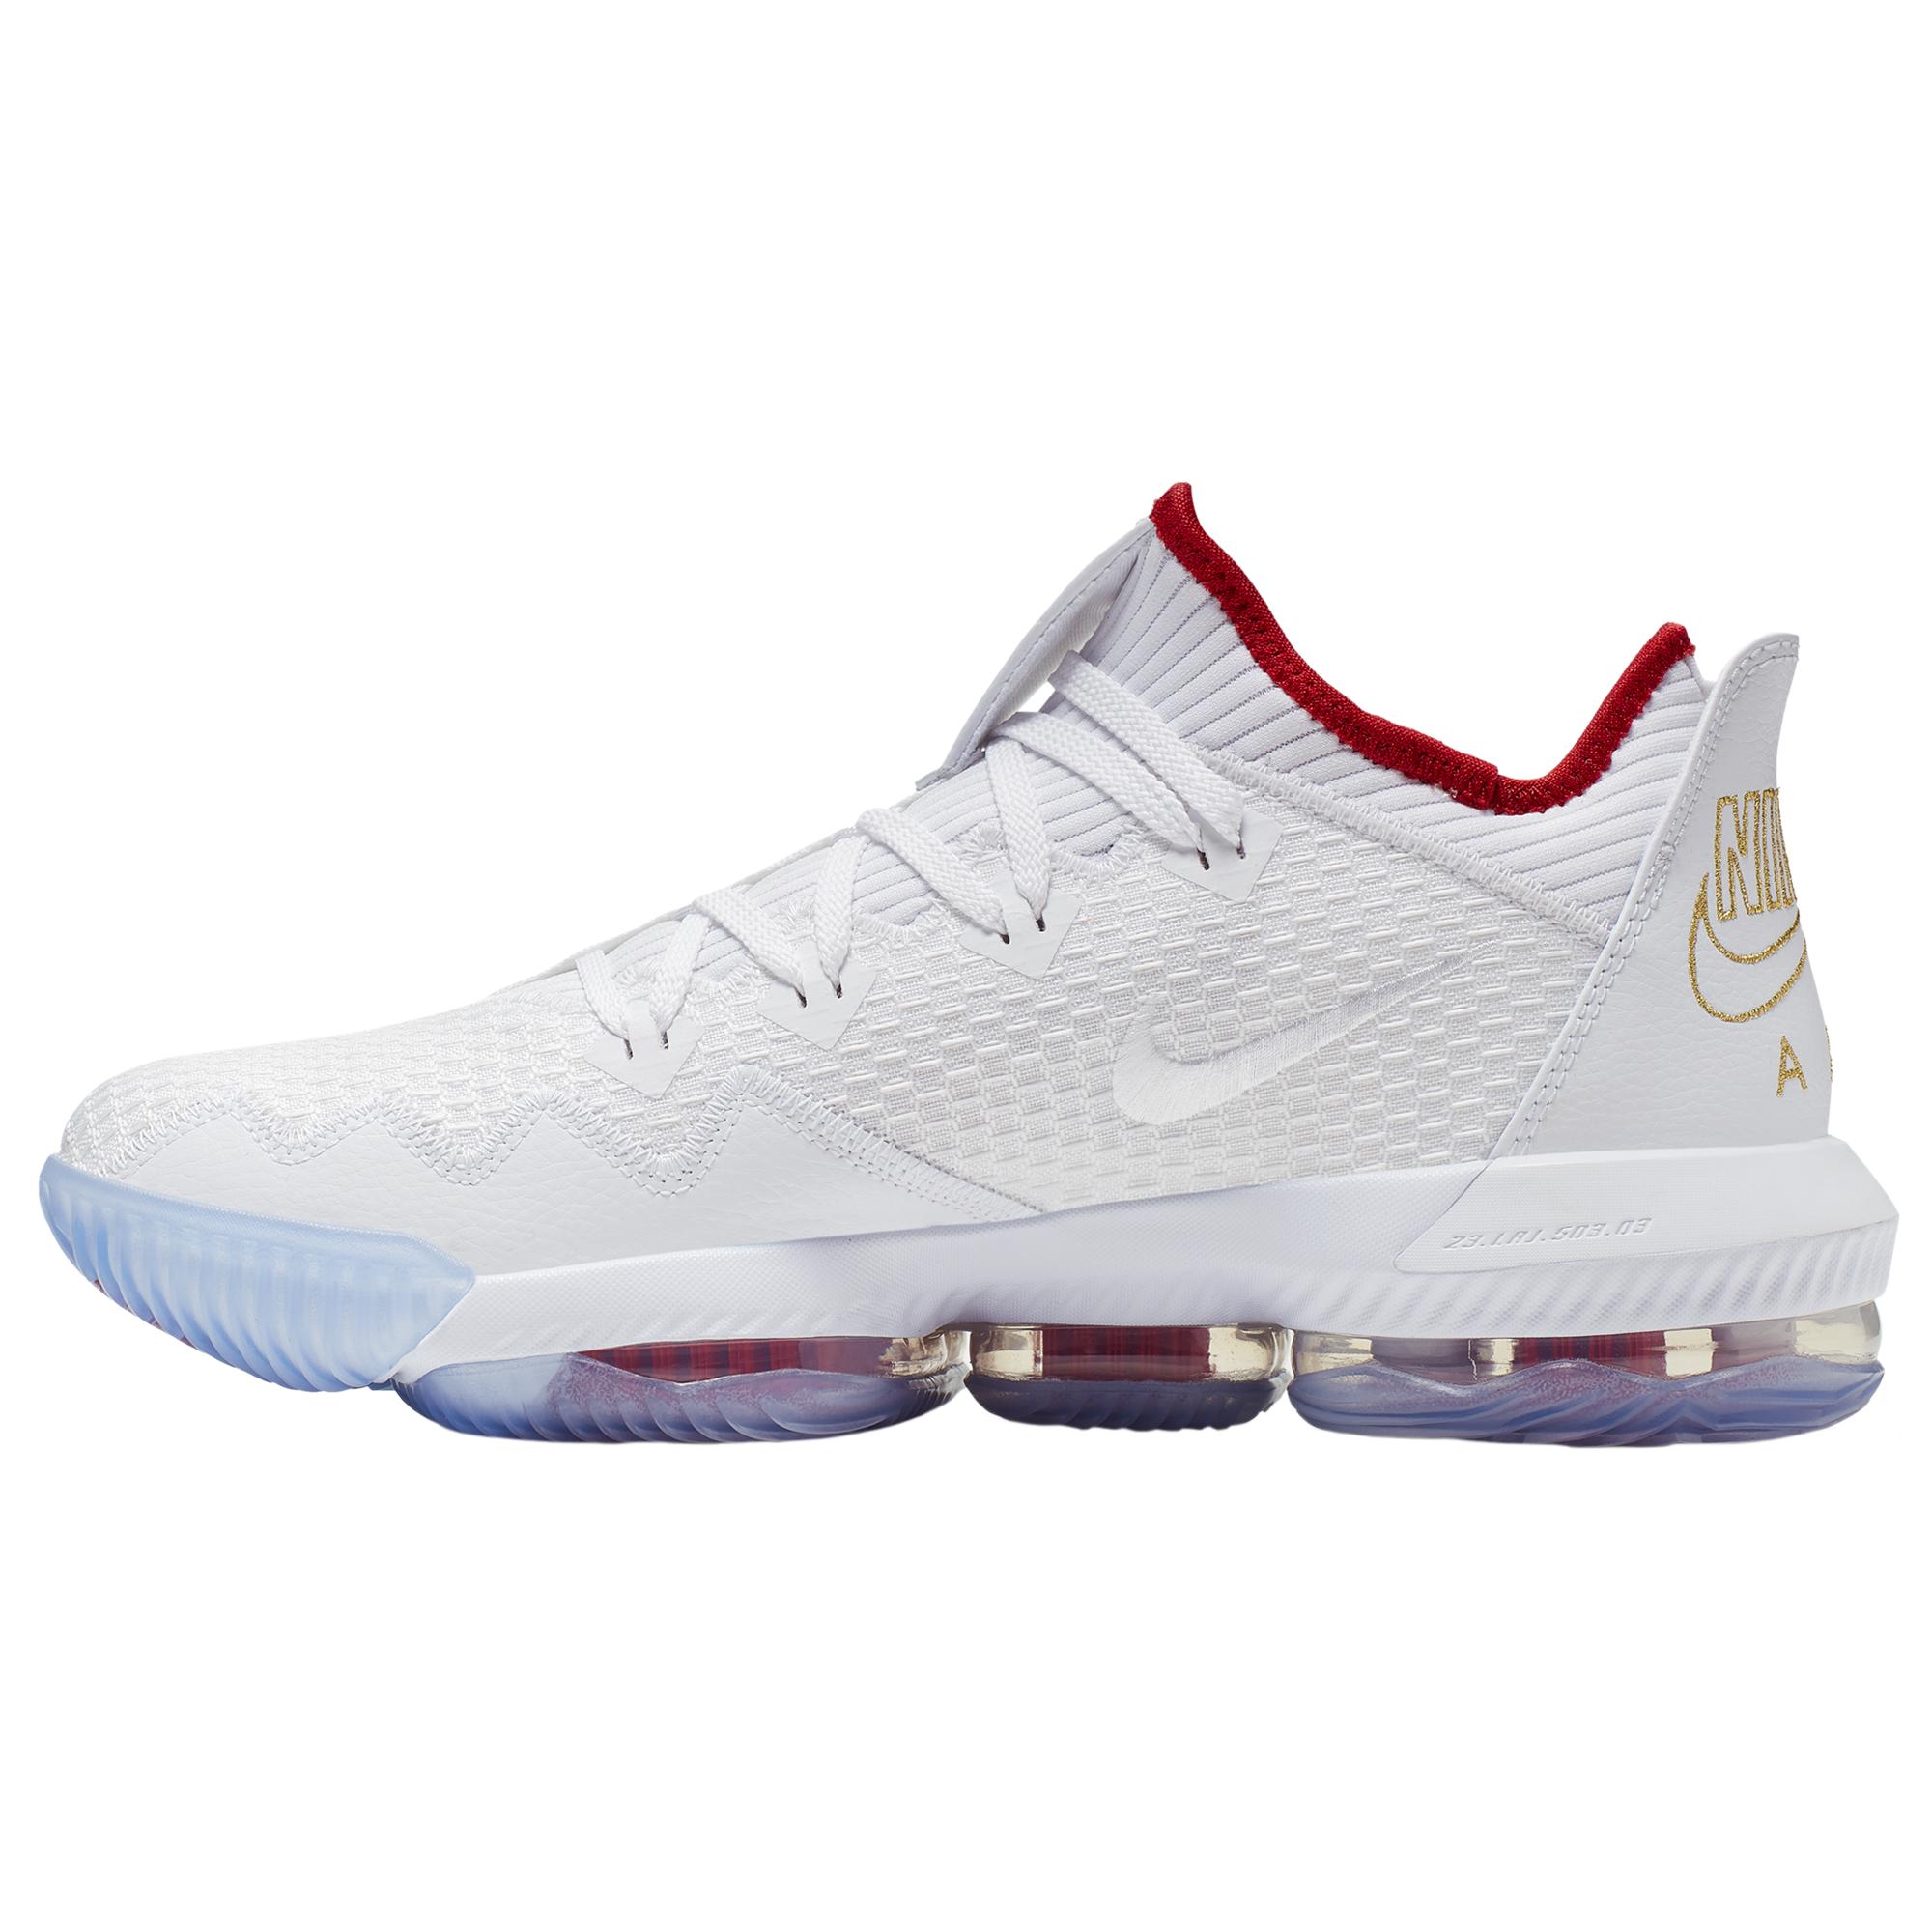 Nike Lebron 16 Low Basketball Shoes in White/Black/University Red/Metal  (White) for Men - Lyst